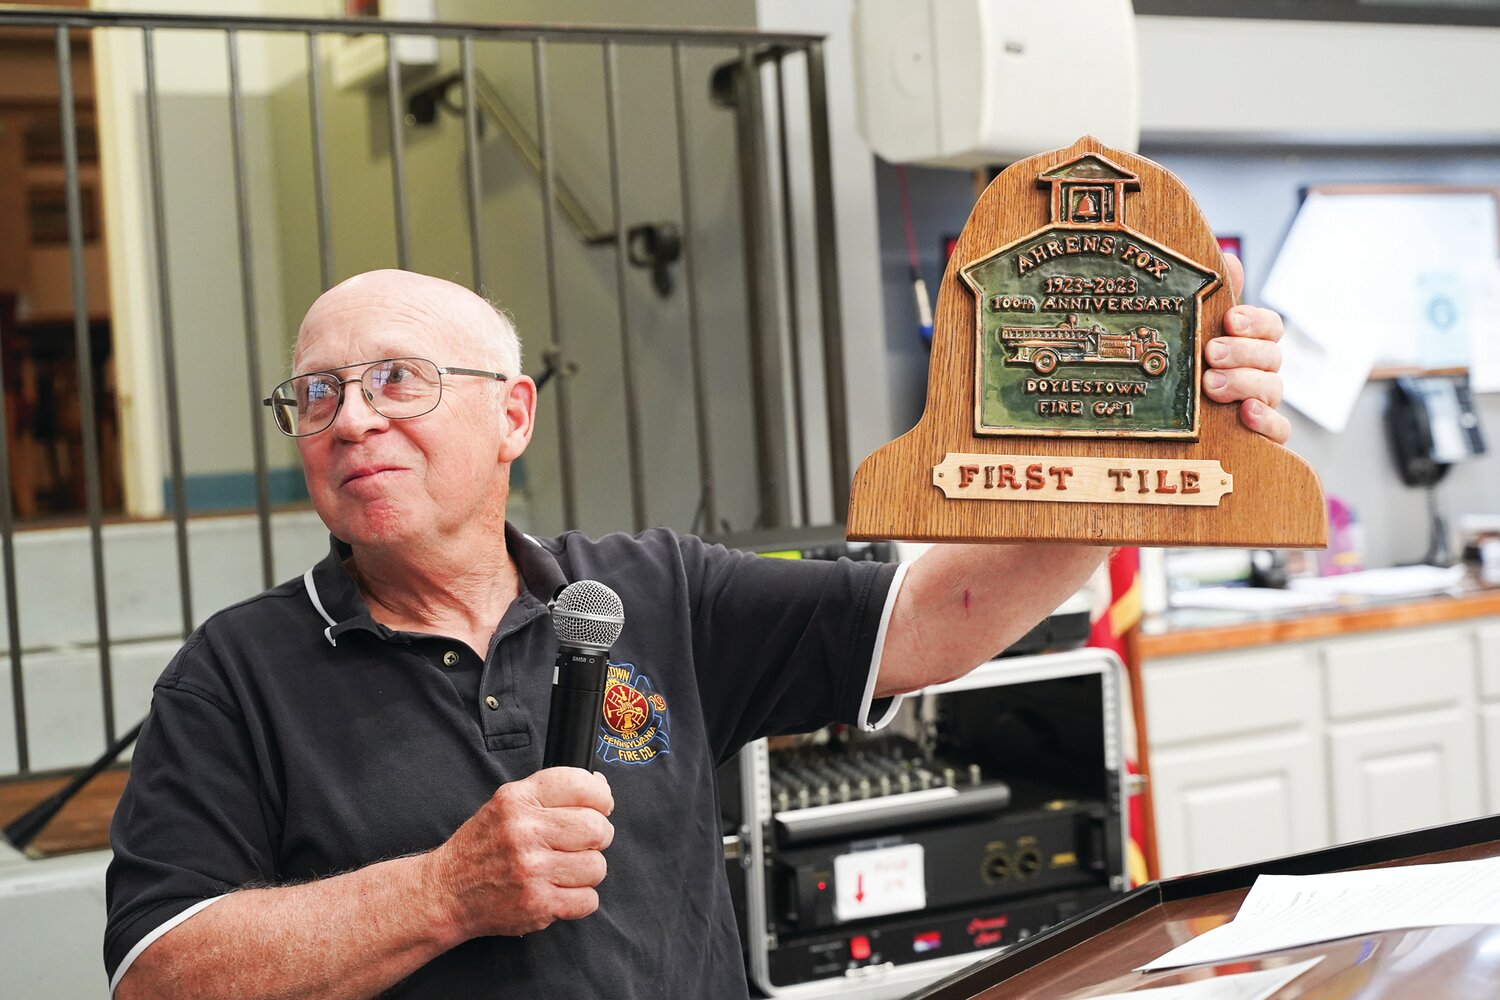 Bill Price, a 52-year firefighter, shows off a tile commemorating the Ahrens Fox pumper’s centennial with Doylestown Fire Co. #1. Price chaired the department’s recent “Old Timers Night,” which recognized the contributions of longtime members.